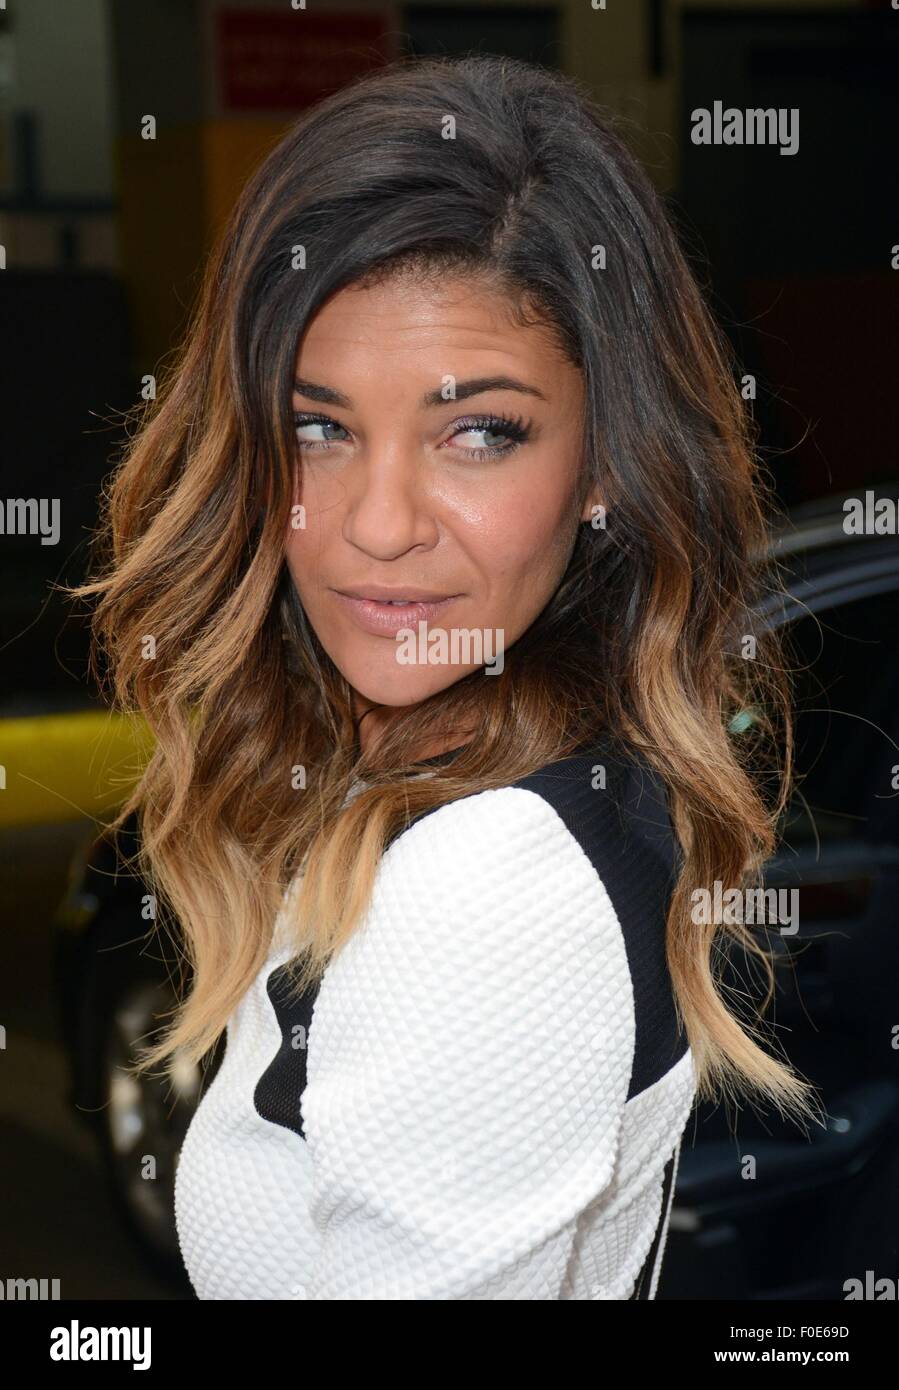 New York, NY, USA. 13th Aug, 2015. Jessica Szohr out and about for Celebrity Candids - THU, New York, NY August 13, 2015. Credit:  Derek Storm/Everett Collection/Alamy Live News Stock Photo